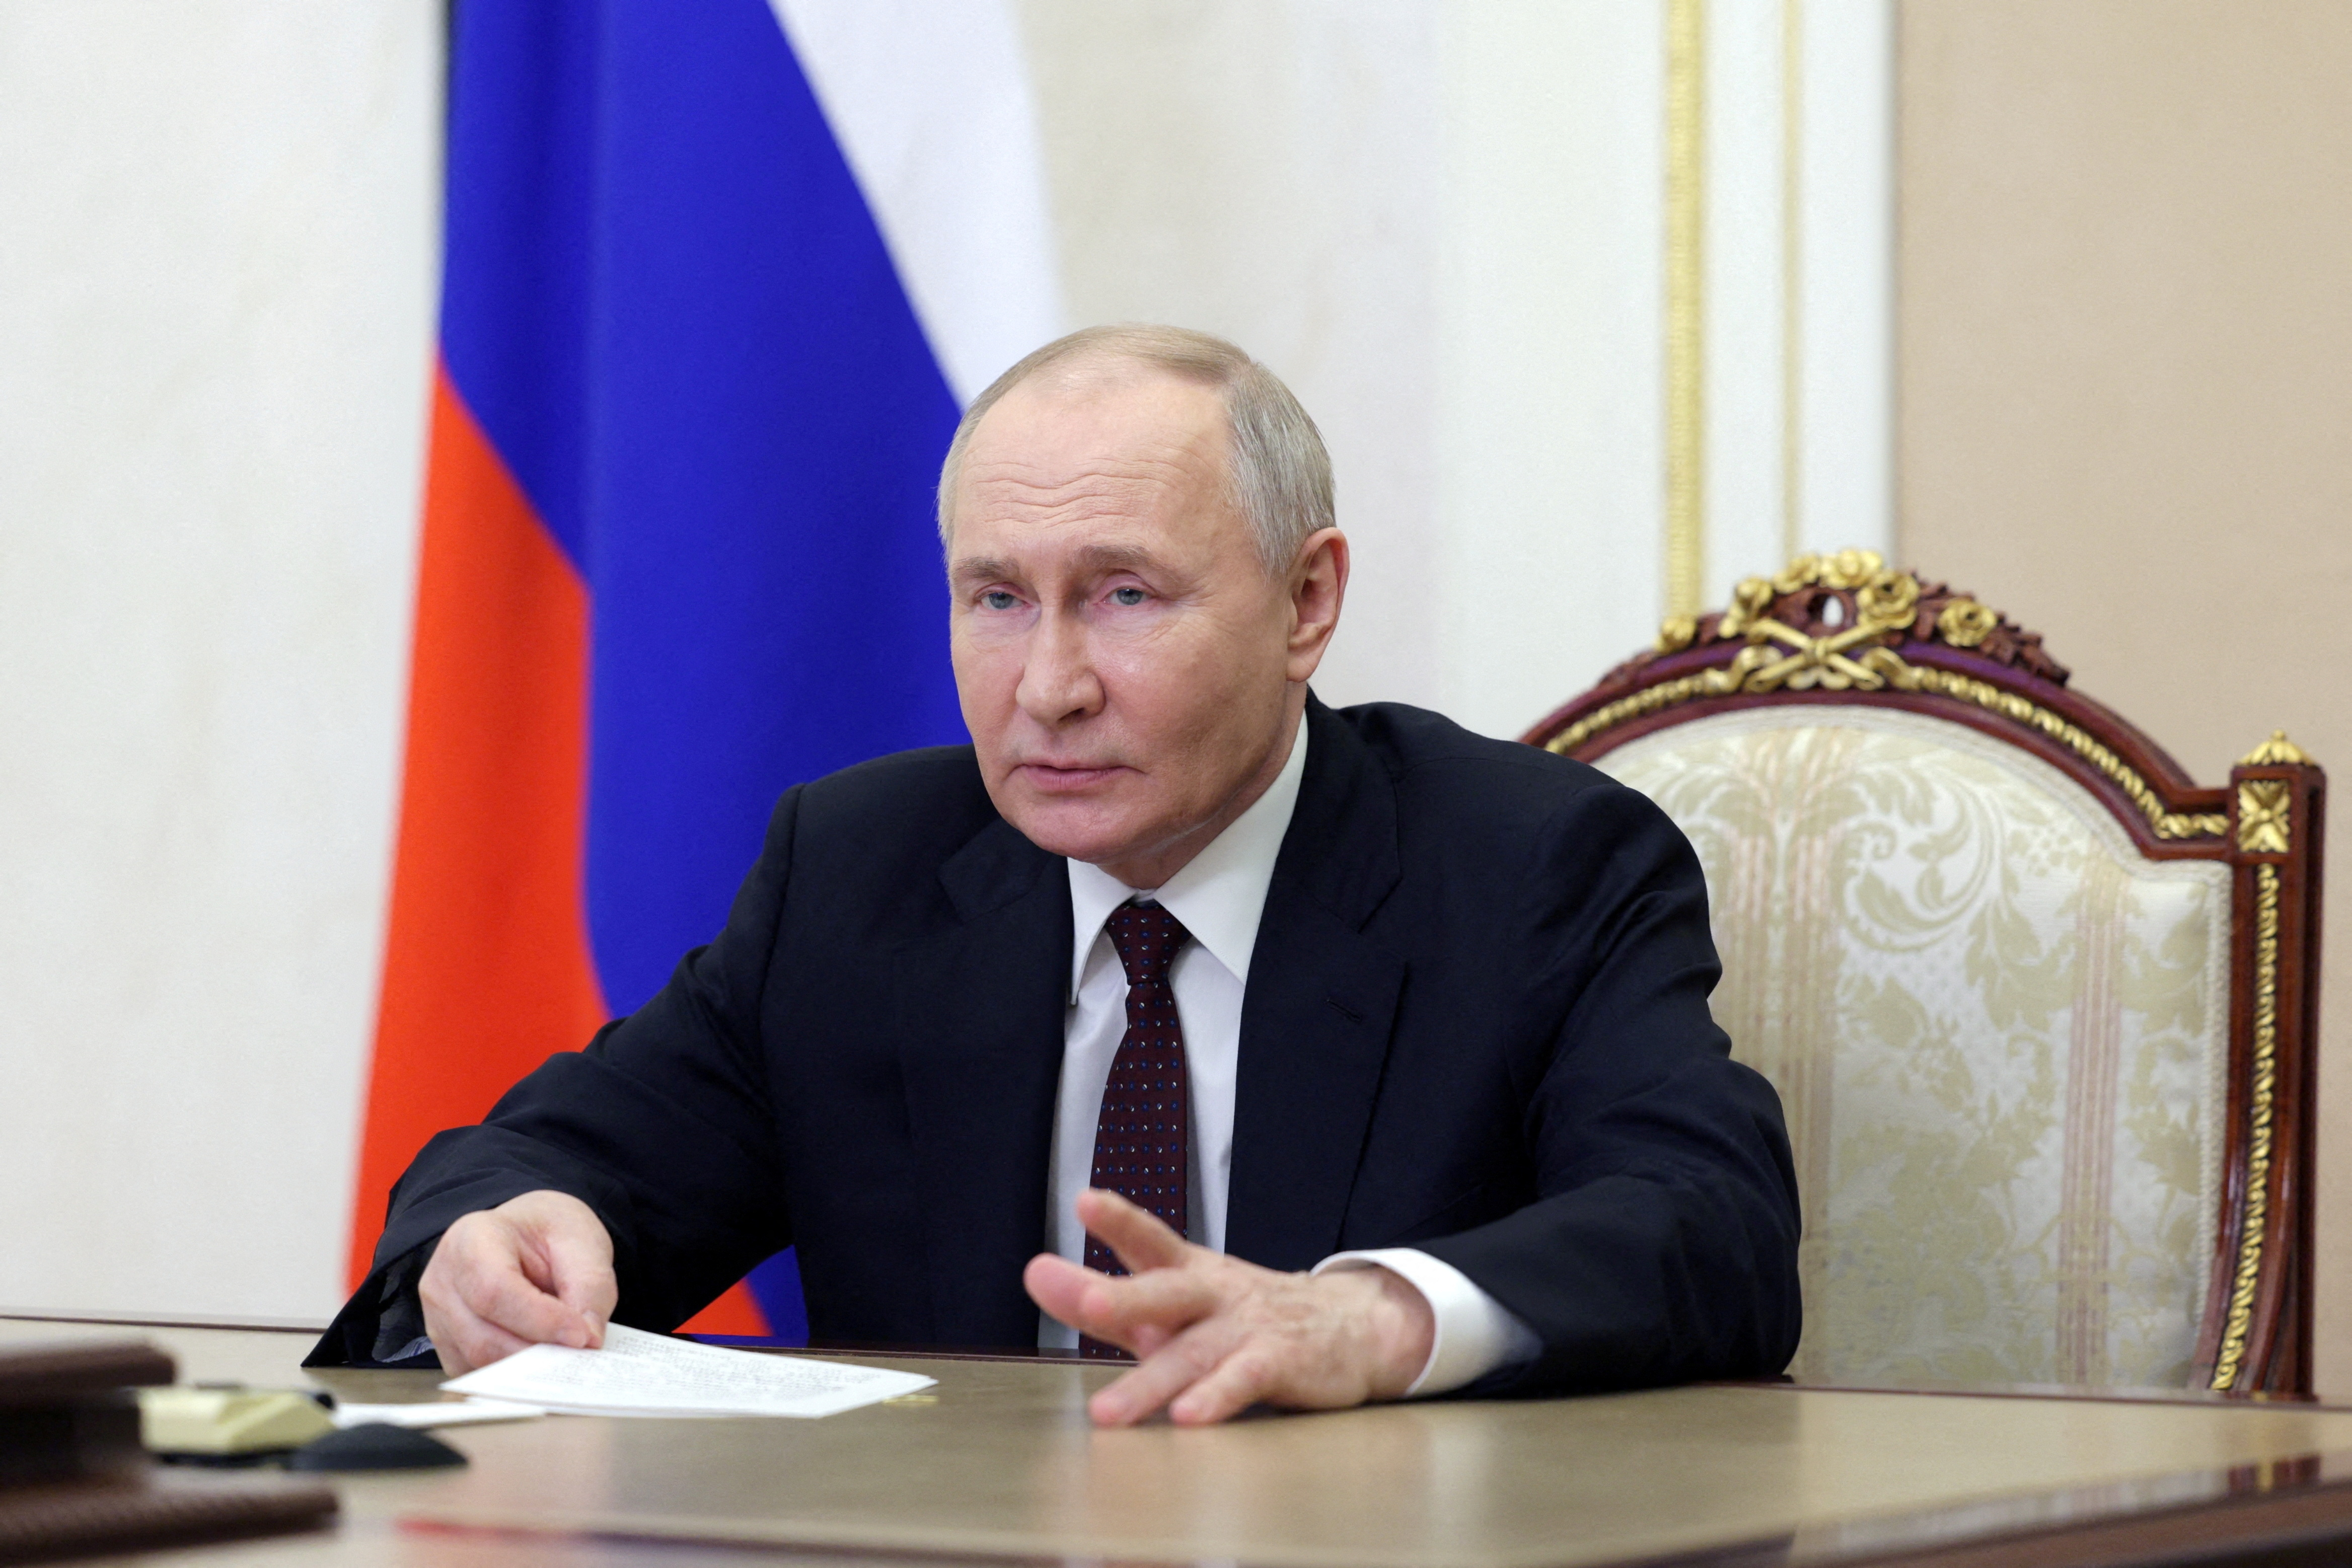 Russian President Putin chairs a meeting on economic issues via video link in Moscow